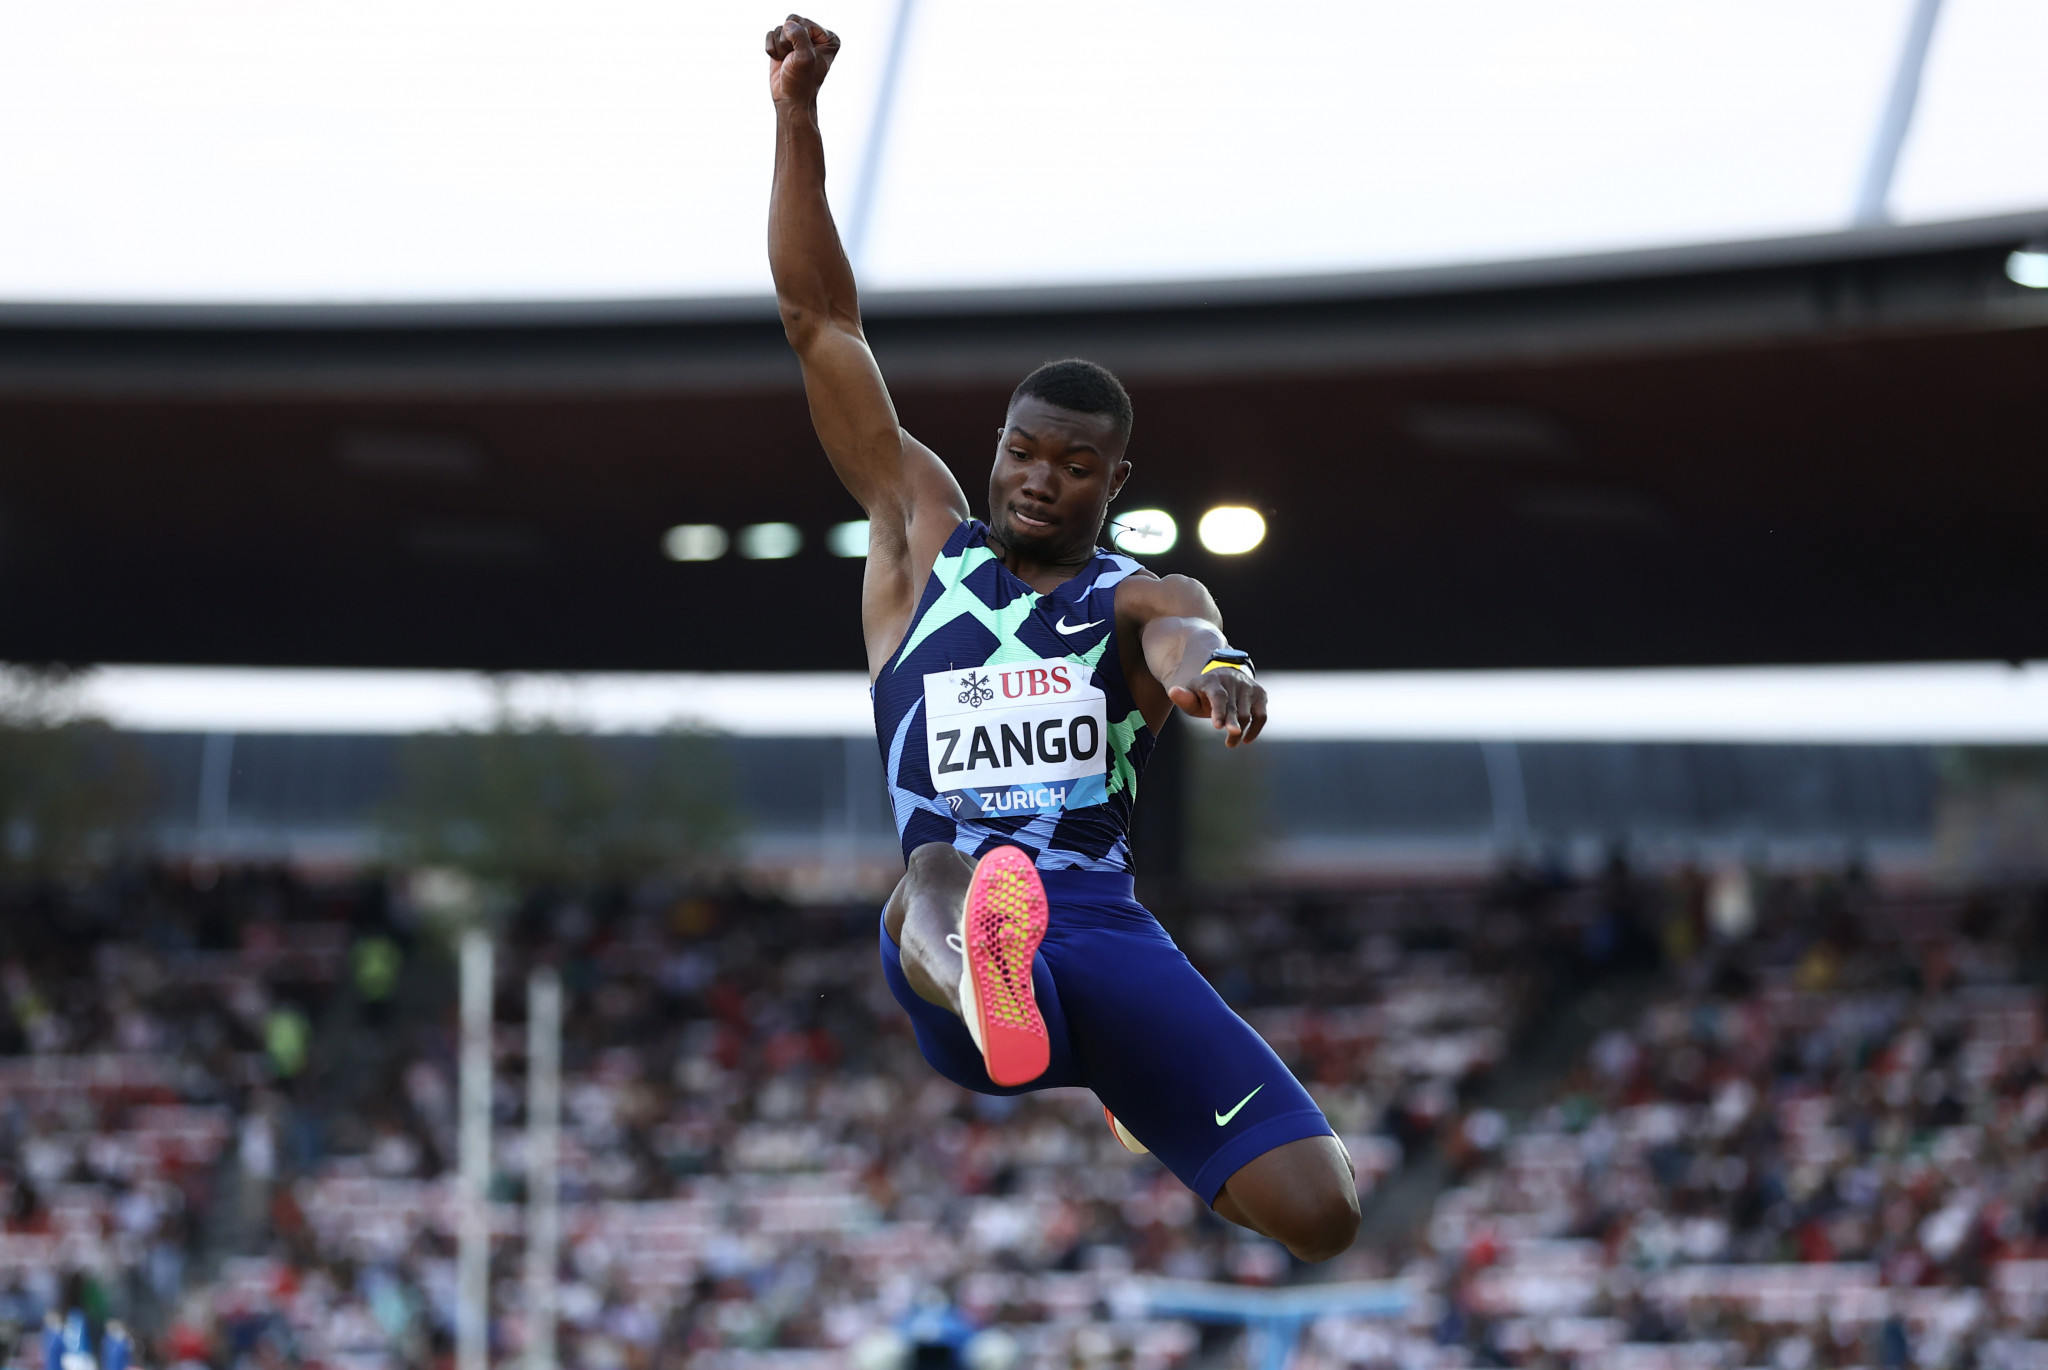 Zango claims triple jump title at African Athletics Championships